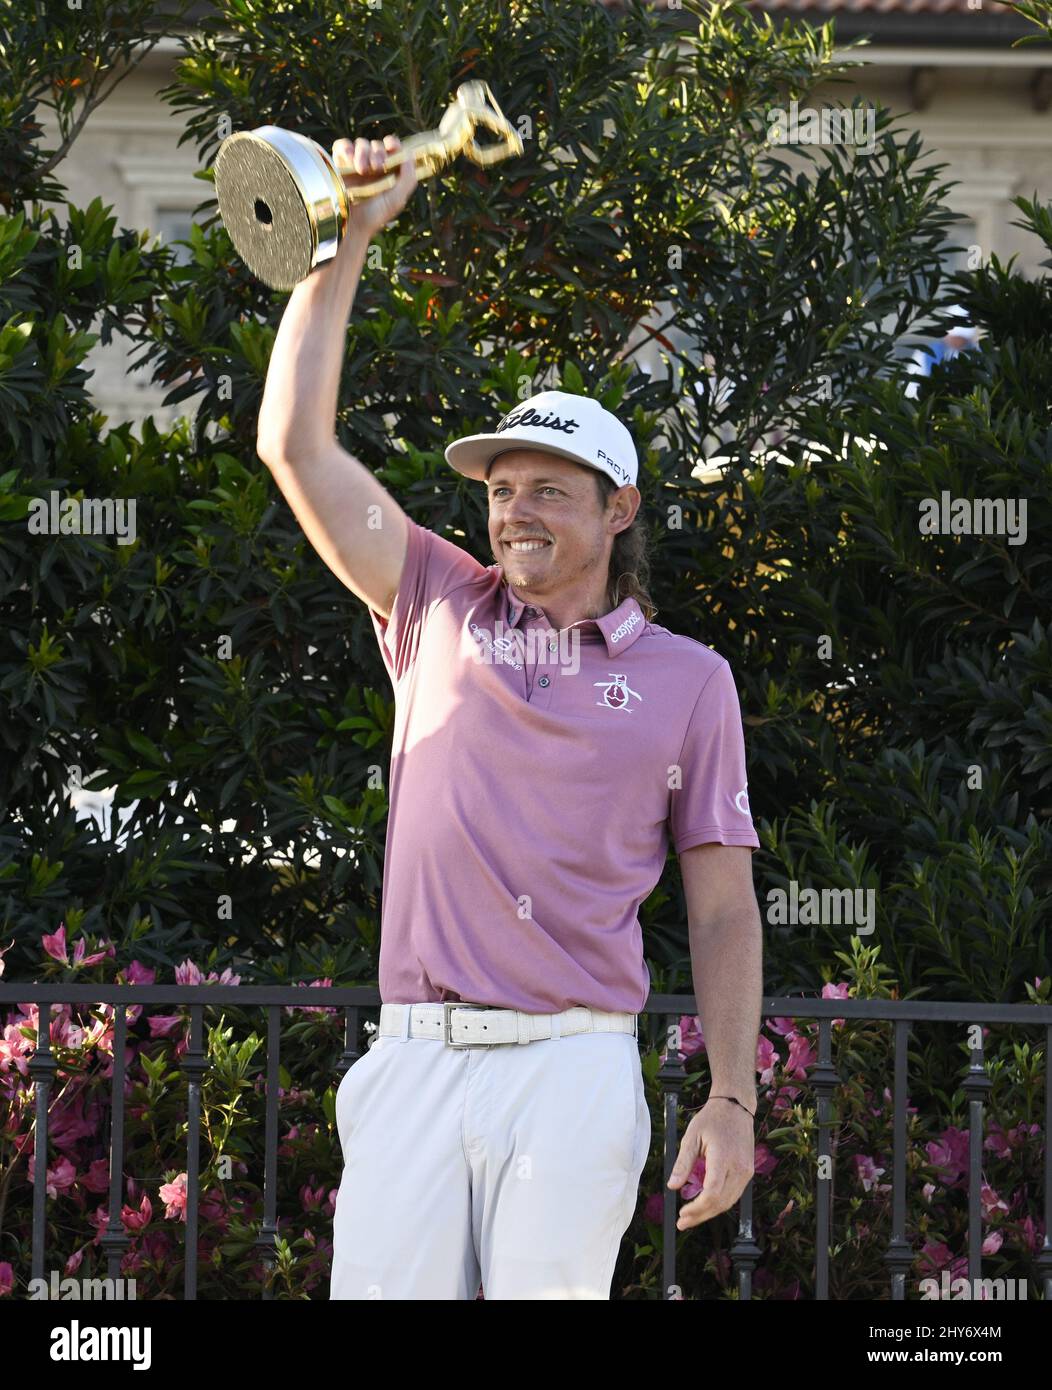 Ponte Vedra Beach, United States. 14th Mar, 2022. Cameron Smith of Australia celebrates with the Gold Man 2022 Players Championship trophy after playing the final round and winning the 2022 Players PGA Championship on the Stadium Course at TPC Sawgrass in Ponte Vedra Beach, Florida on Monday, March 14, 2022. Smith won the championship with a score of 13 under par. Photo by Joe Marino/UPI Credit: UPI/Alamy Live News Stock Photo